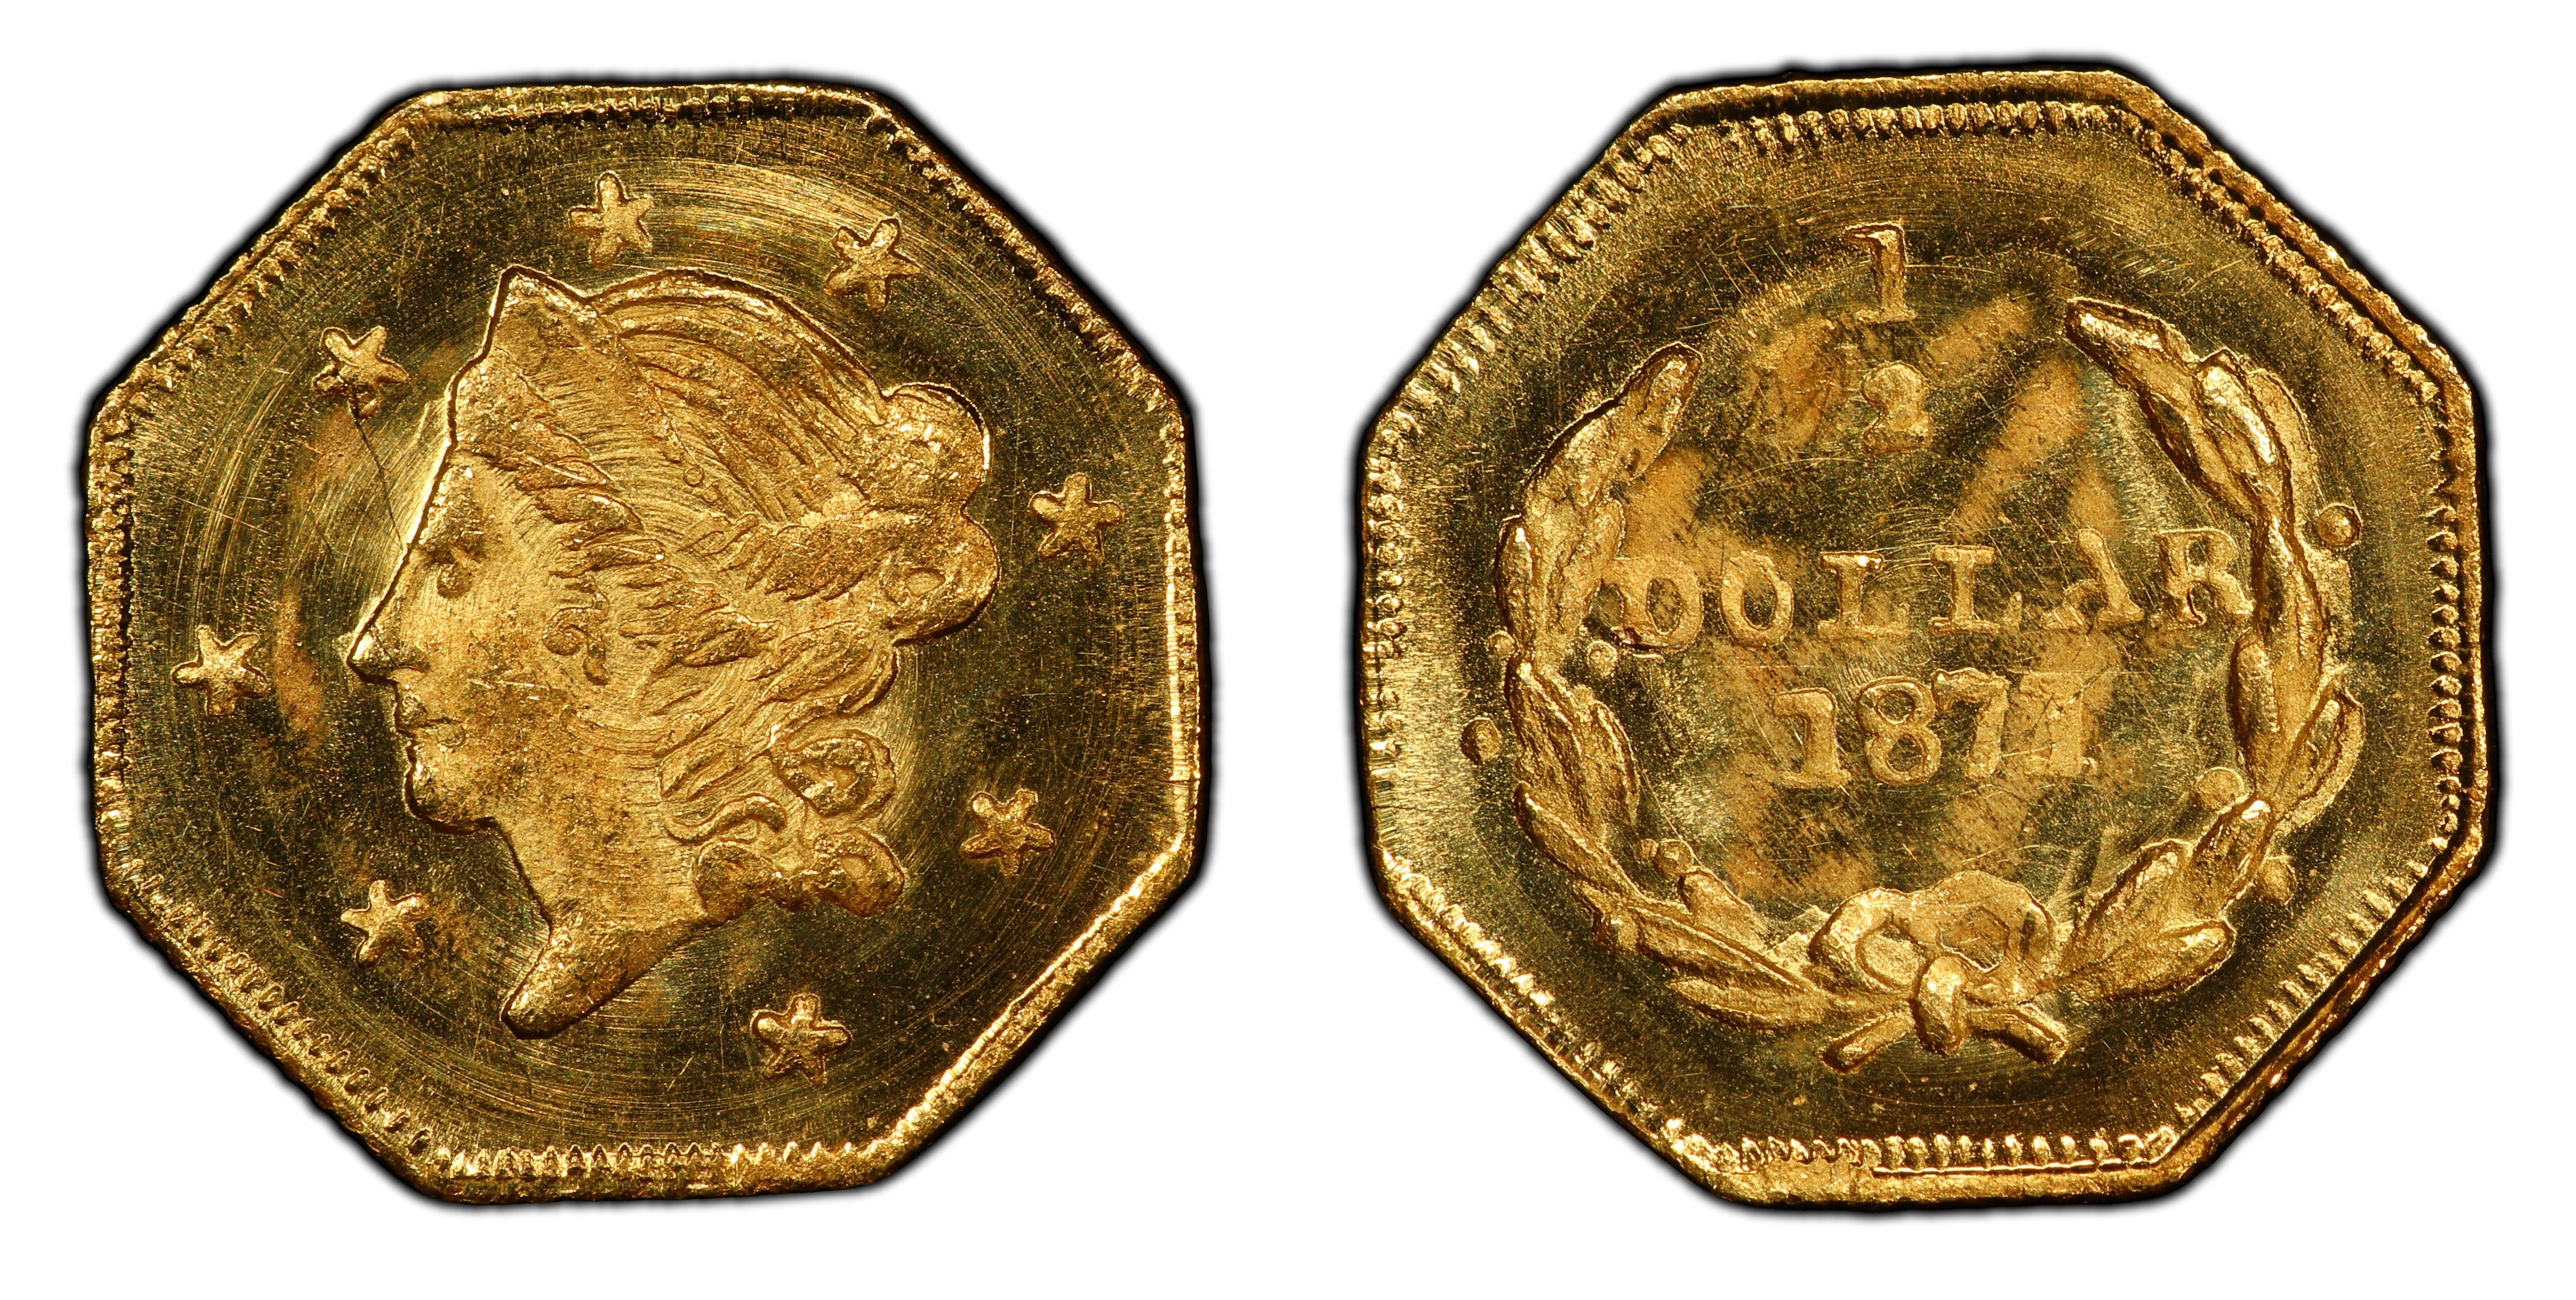 1871 $1 (Regular Strike) Liberty Seated Dollar - PCGS CoinFacts